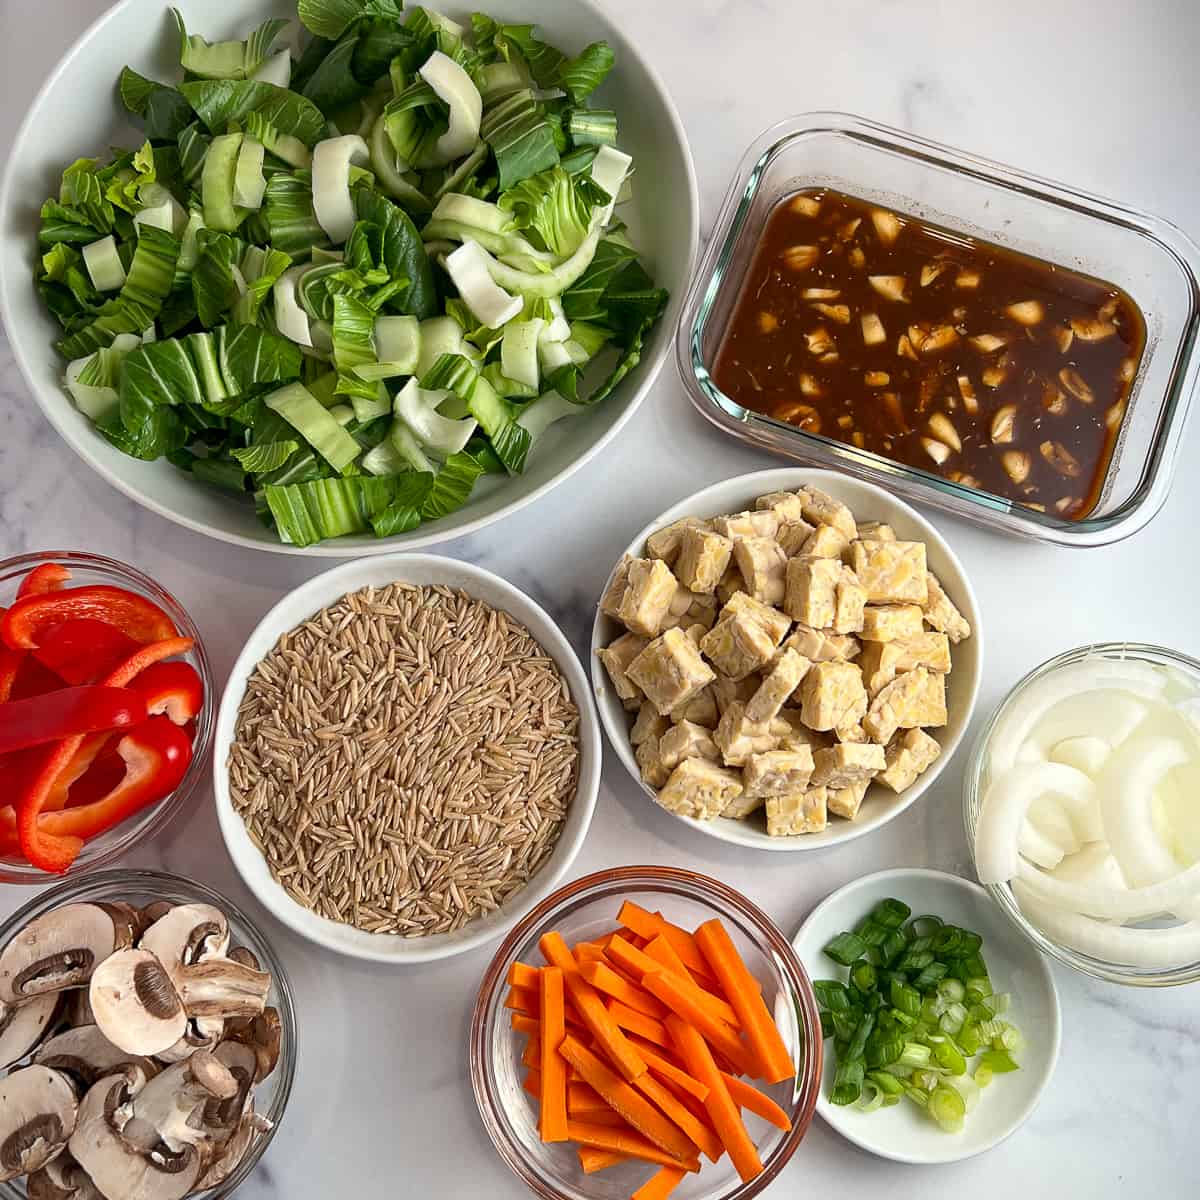 top view of key ingredients needed for recipe: tempeh, brown rice, onion, carrot, mushrooms, red bell pepper, baby bok choy and stir fry sauce